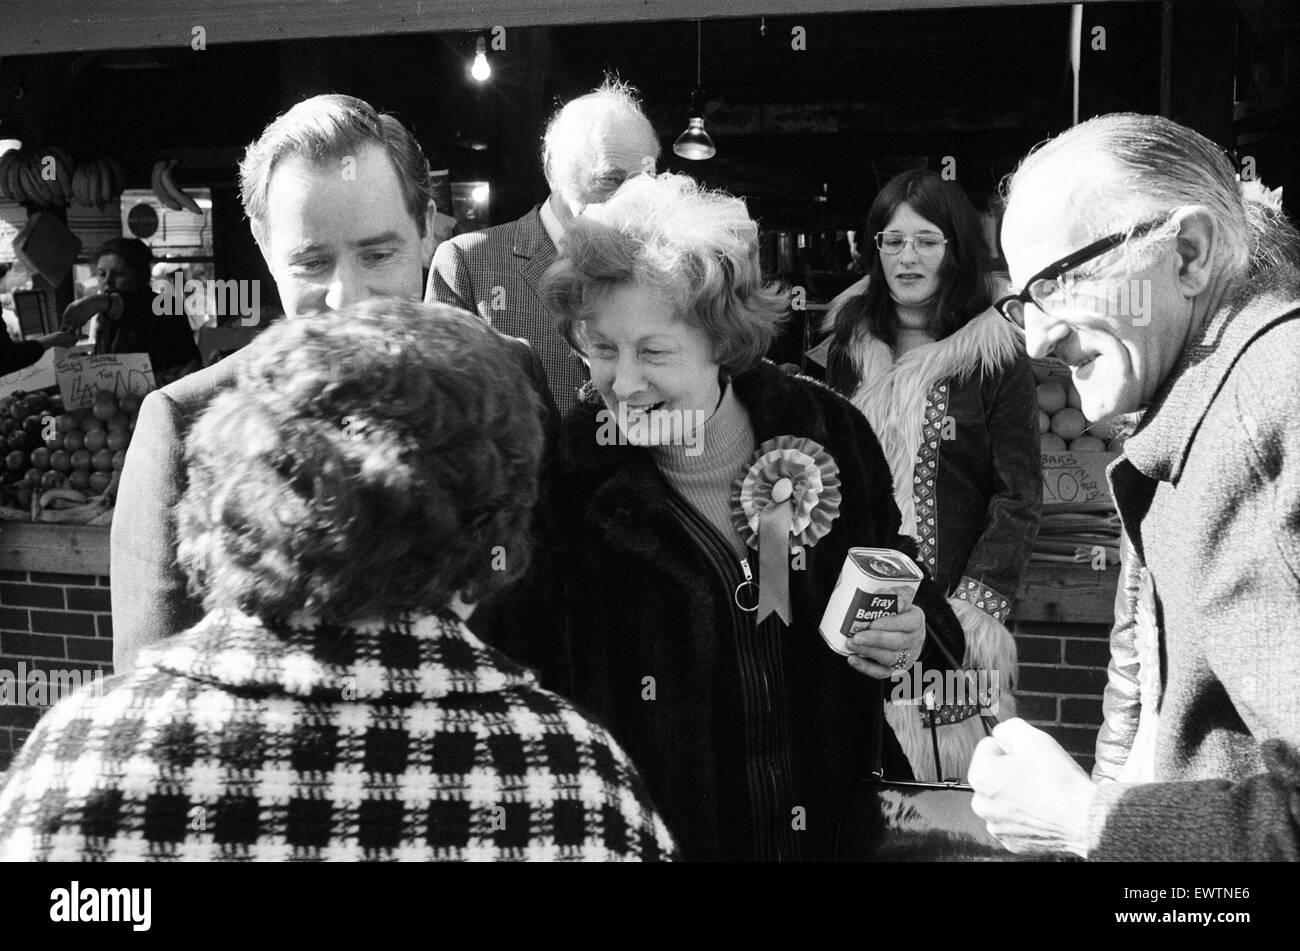 Barbara Castle, Member of Parliament for Blackburn, pictured campaigning in Salford, Greater Manchester, ahead of 1974 General Election, 22nd February 1974. Stock Photo